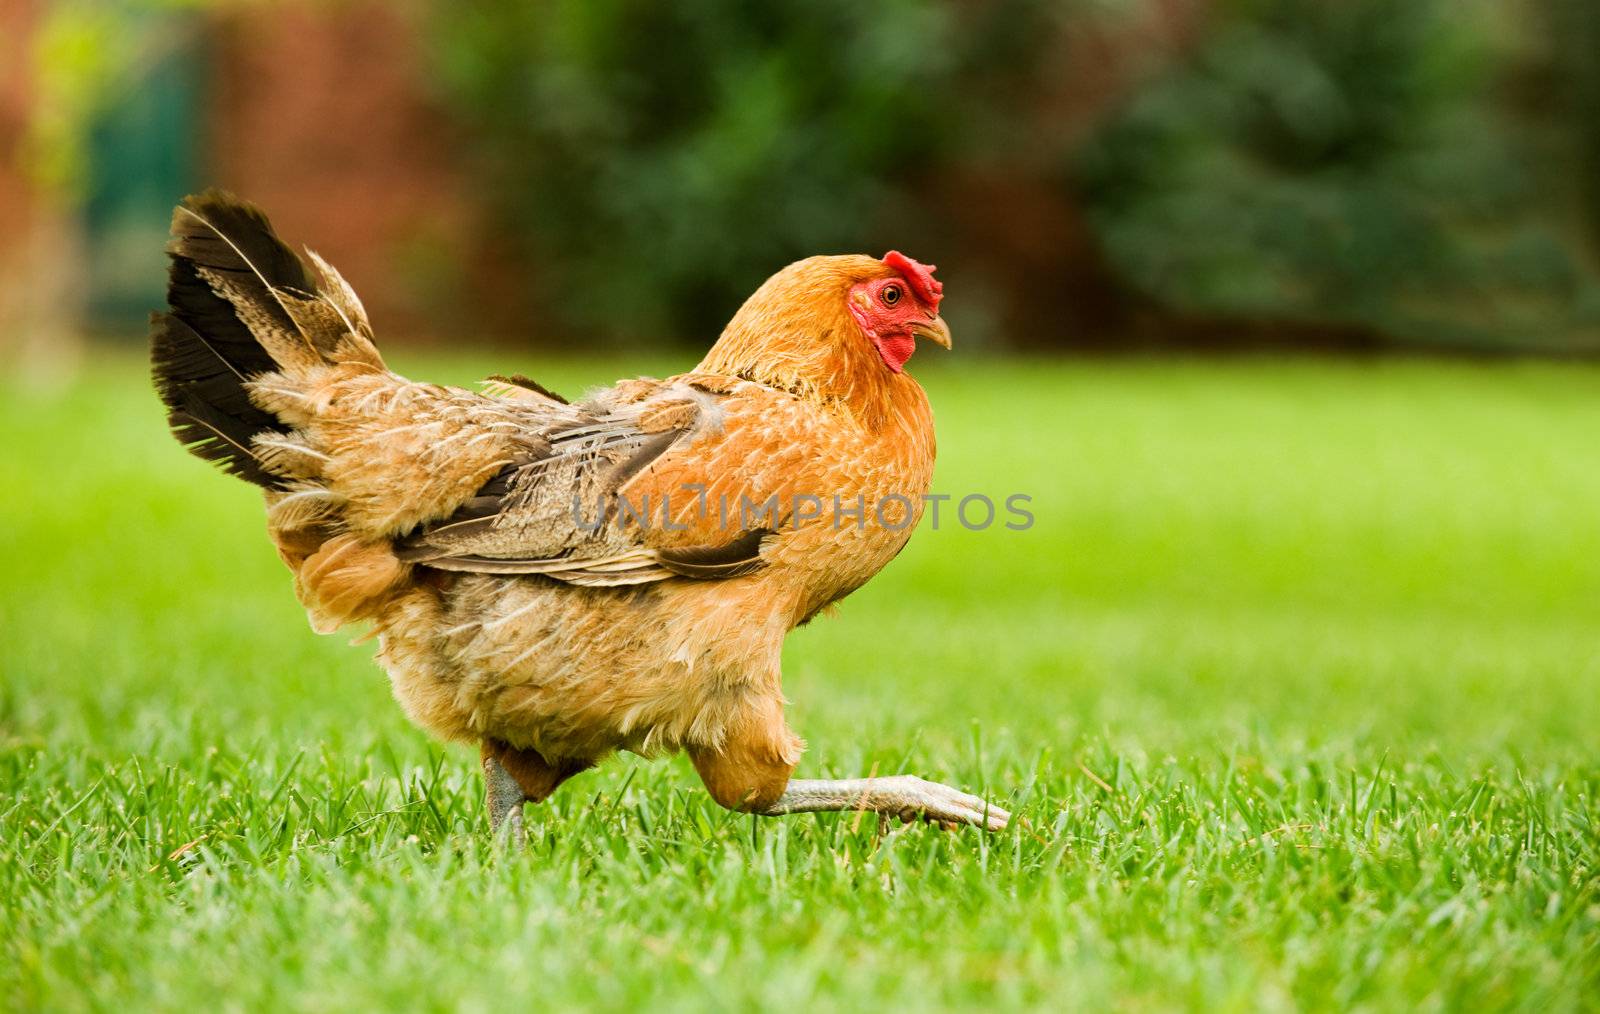 Hen on the move by akarelias